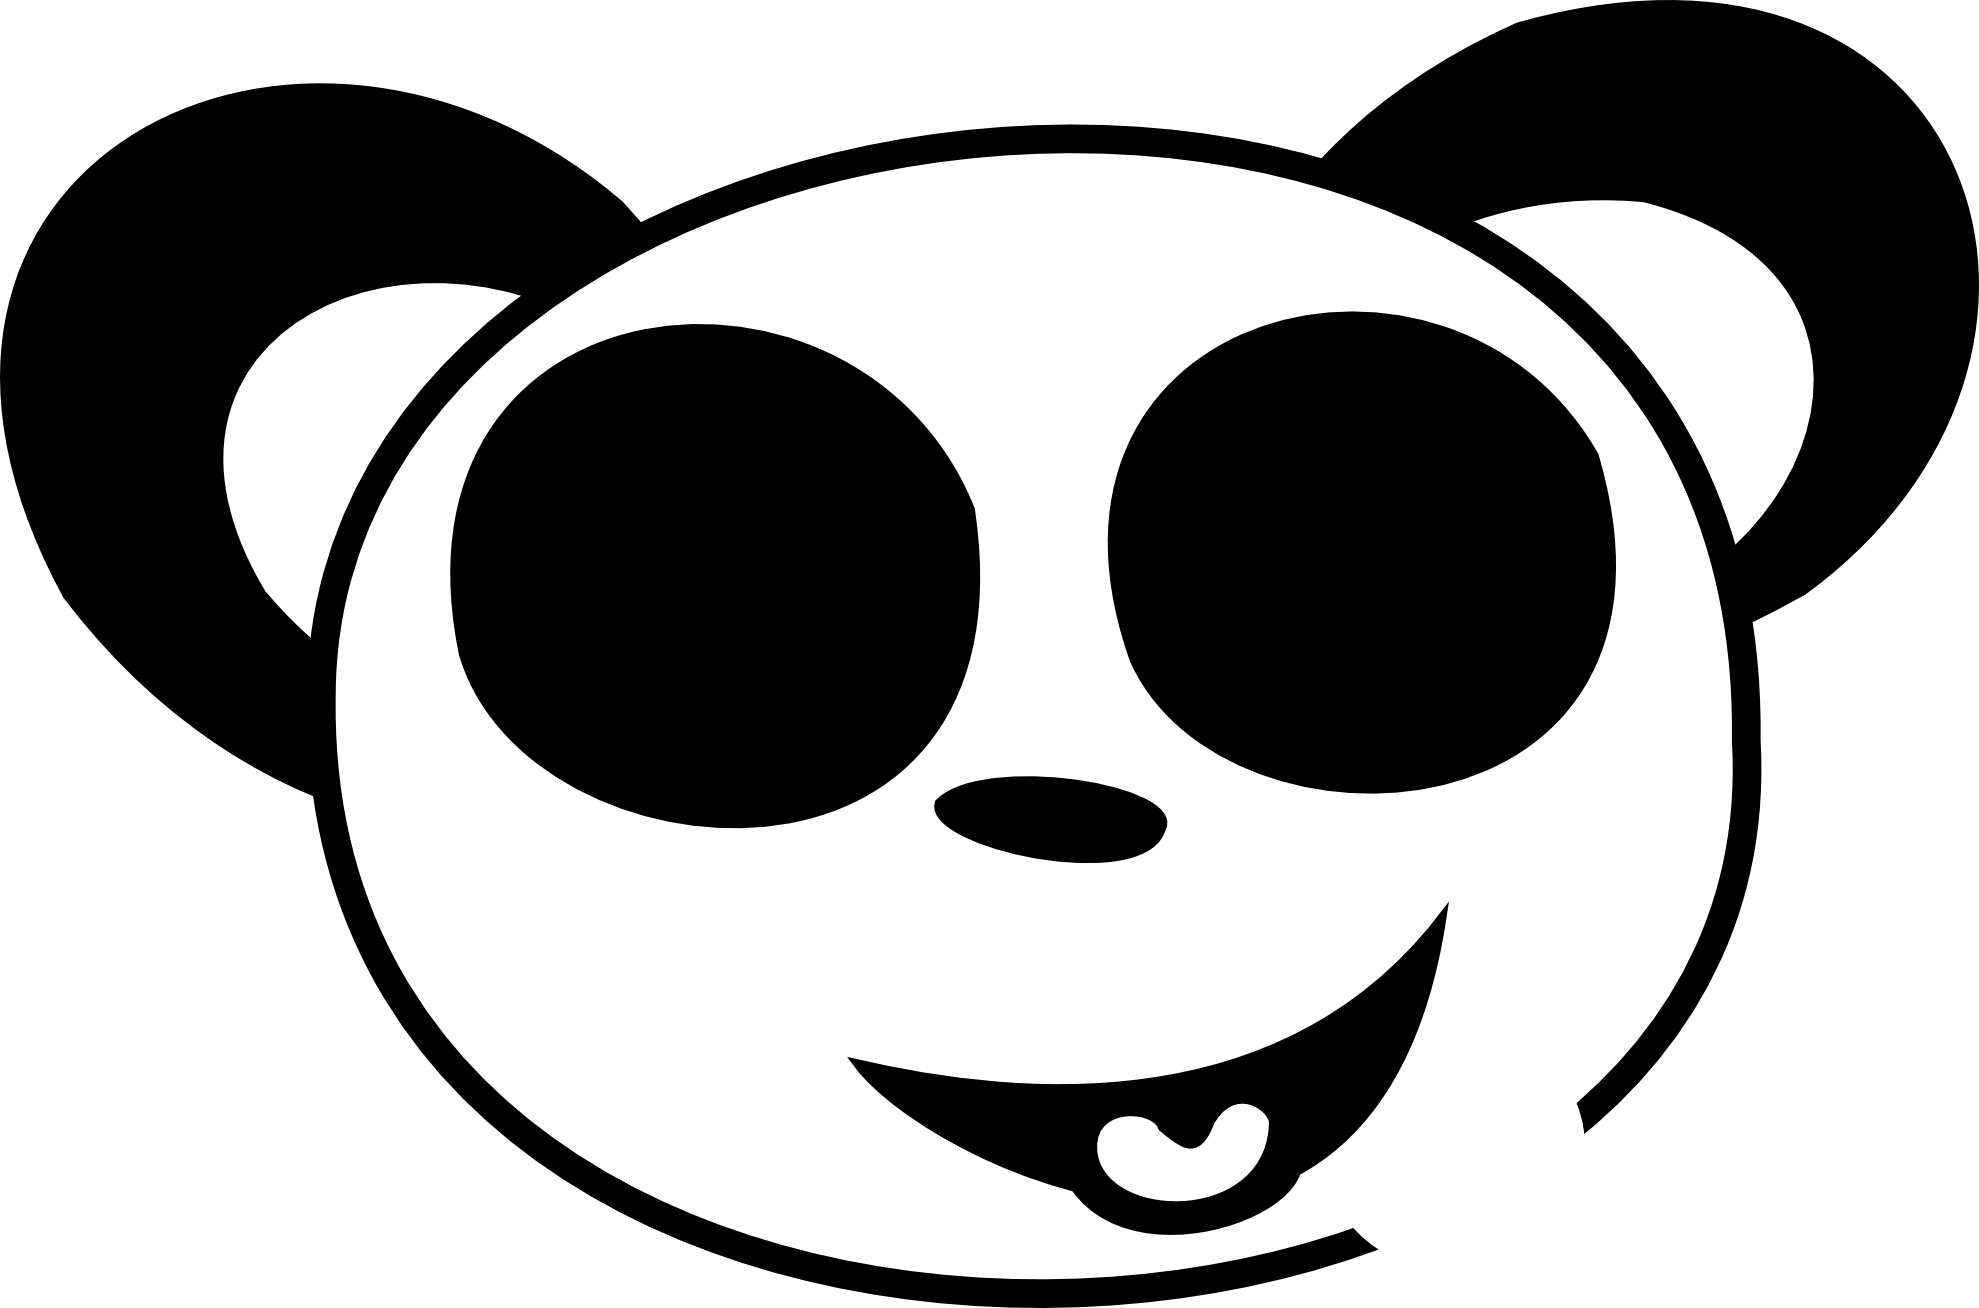 panda clipart black and white - Smiley Face Clip Art Black And White